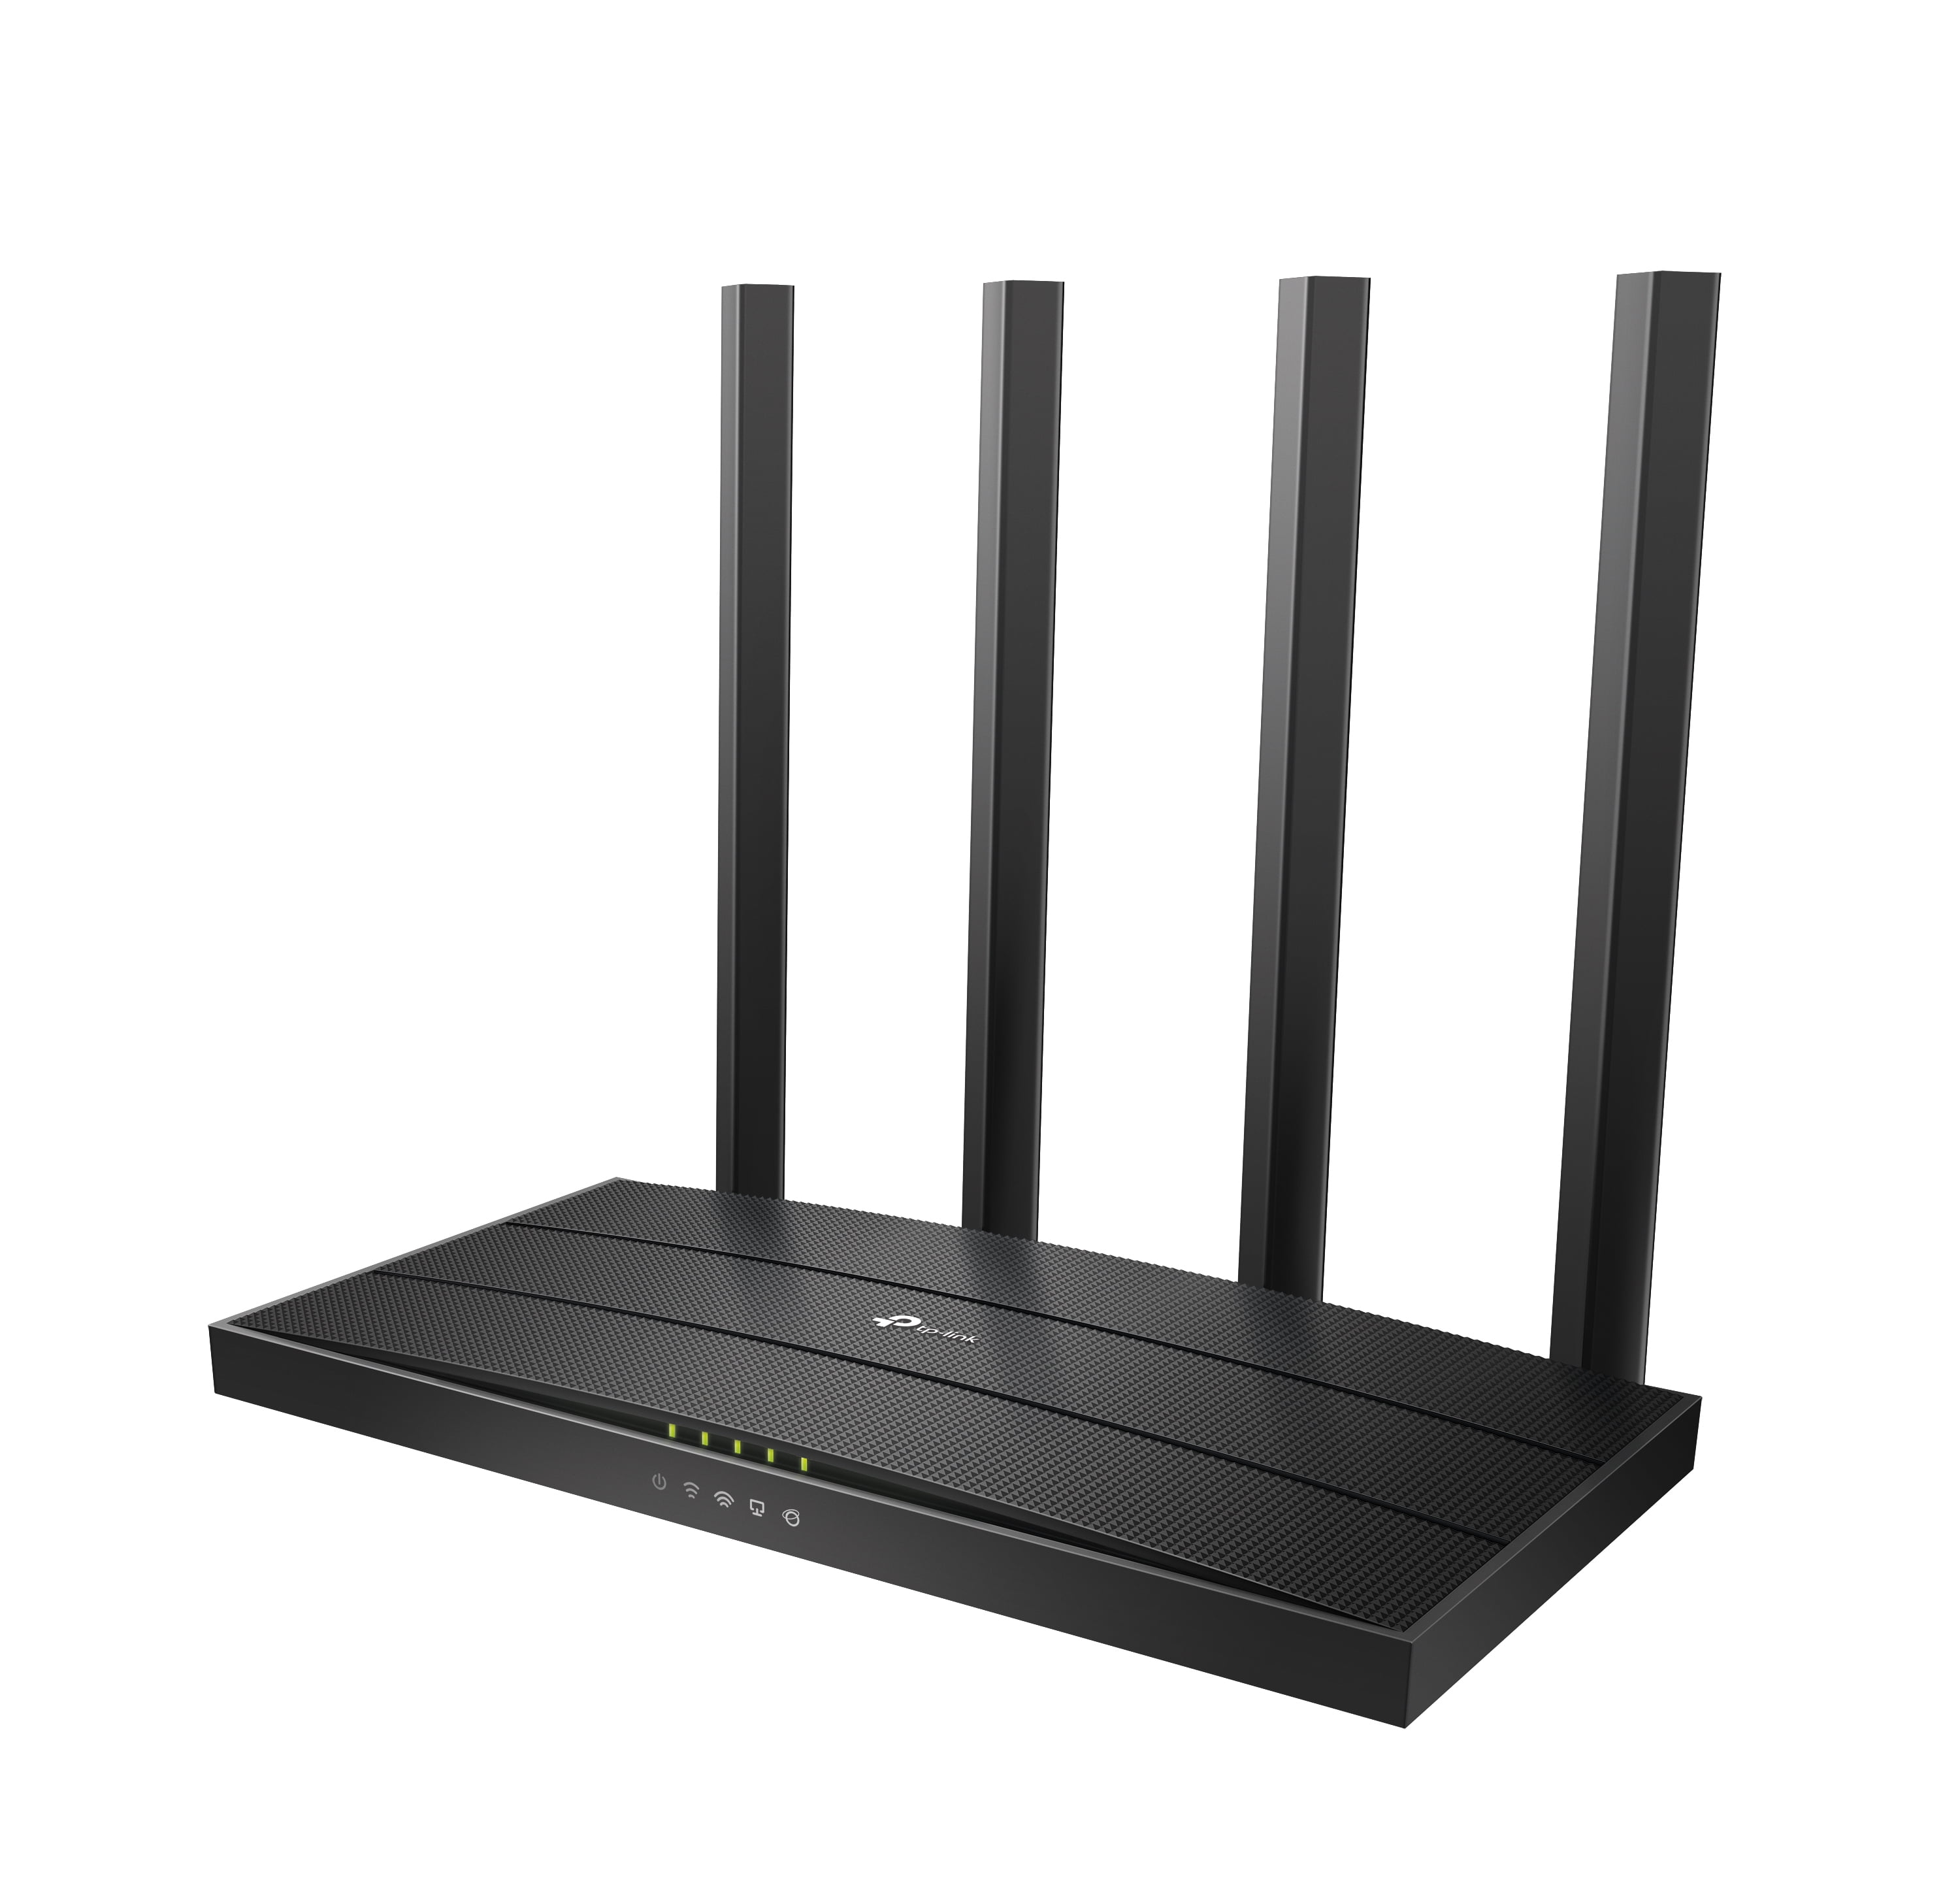 TP-Link Archer AC1900 Dual-Band Mu-Mimo Wi-Fi Router with Gigabit Port